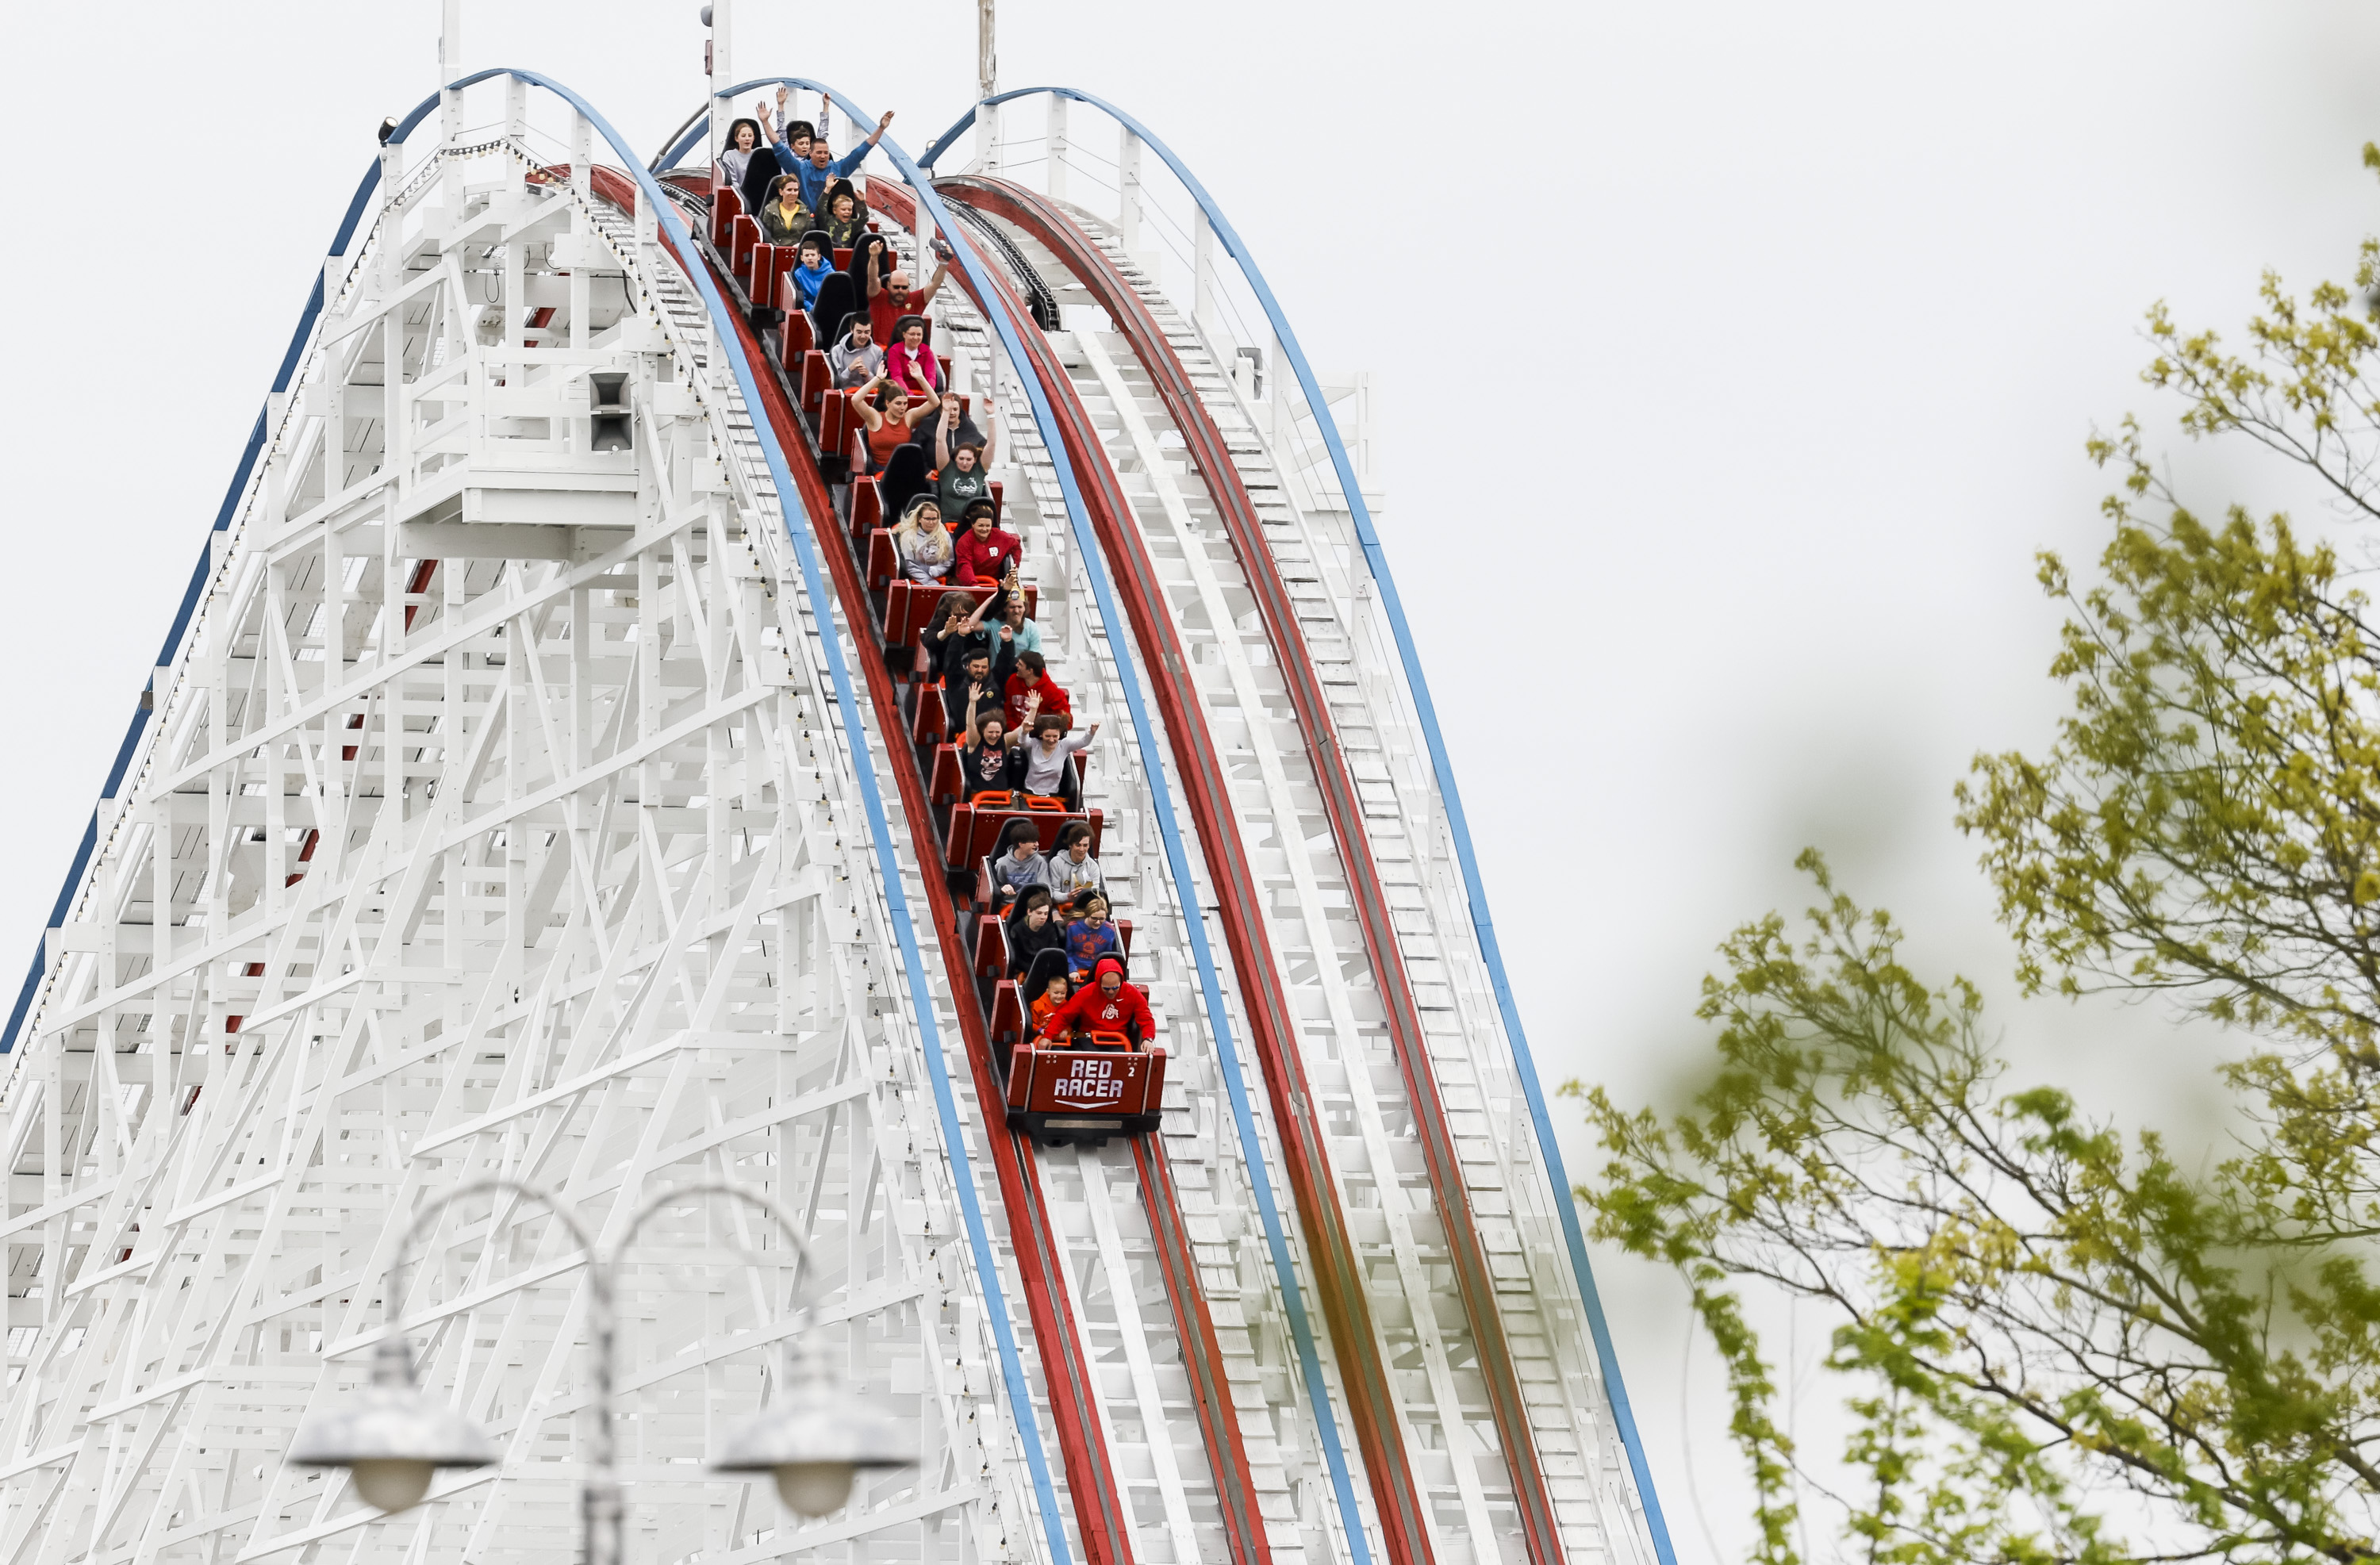 kings-island-opens-for-season-with-over-100-attractions